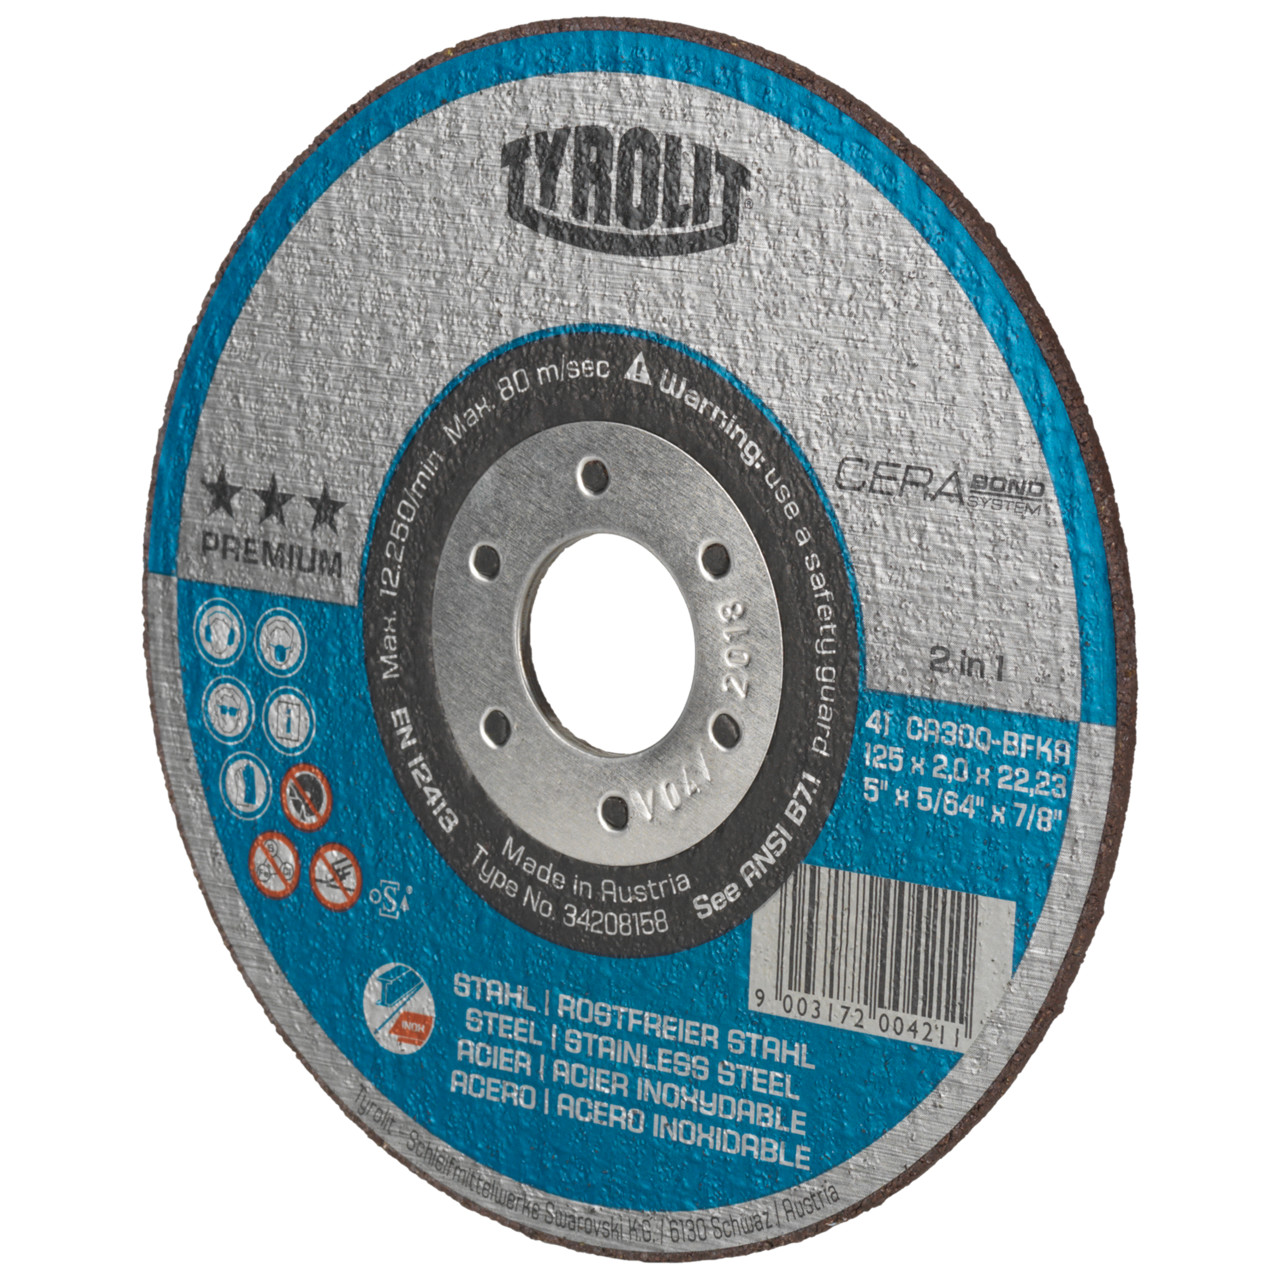 TYROLIT CERABOND Cutting disc DxDxH 230x2.0x22.23 2in1 for steel and stainless steel, shape: 41 - straight version, Art. 34256276